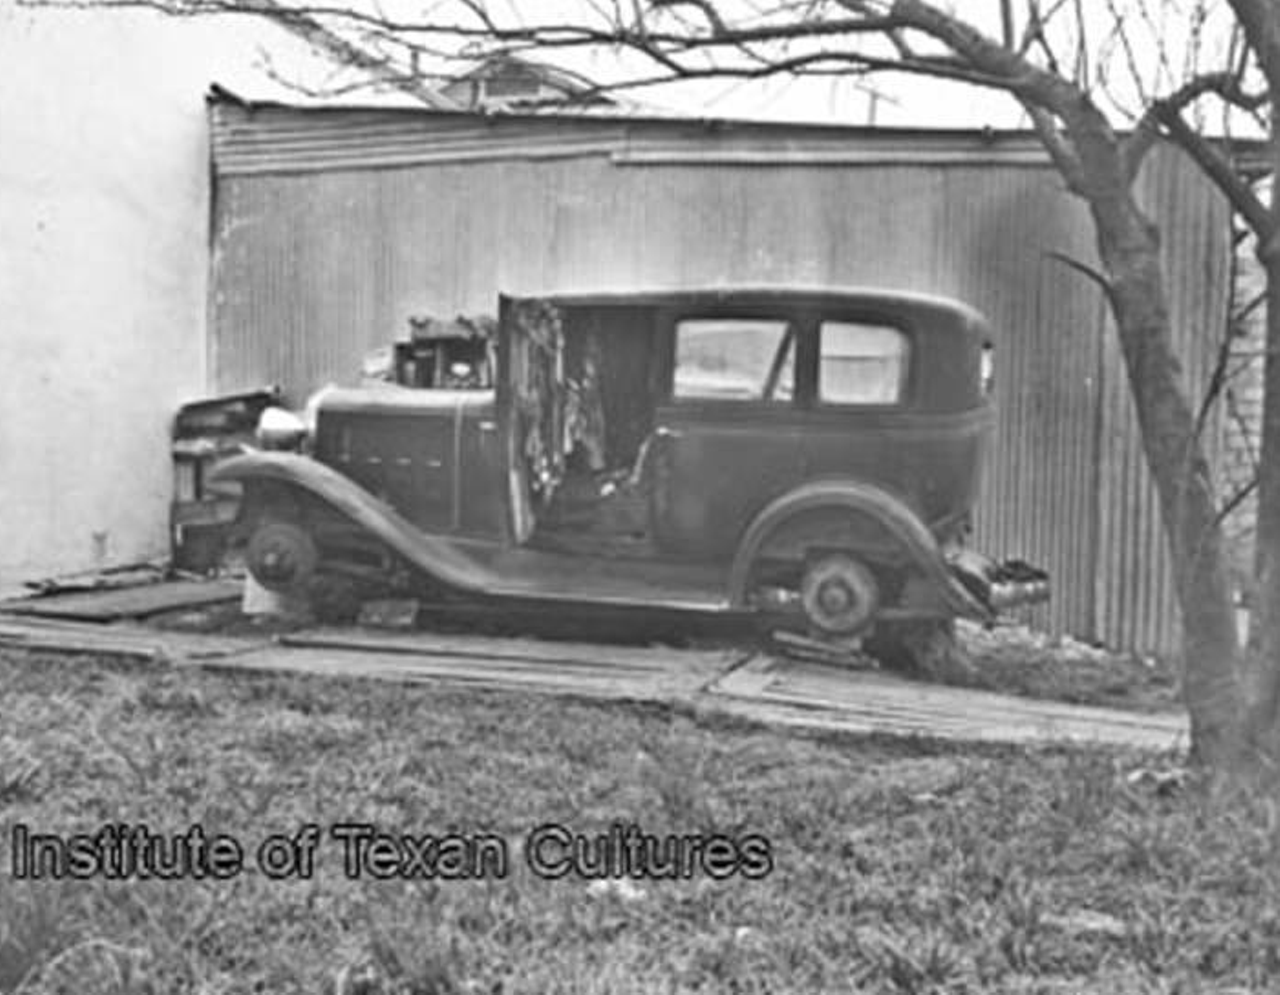 It may have been the early 1960s, but some unfortunate San Antonians used this 1932 Chevrolet as shelter.